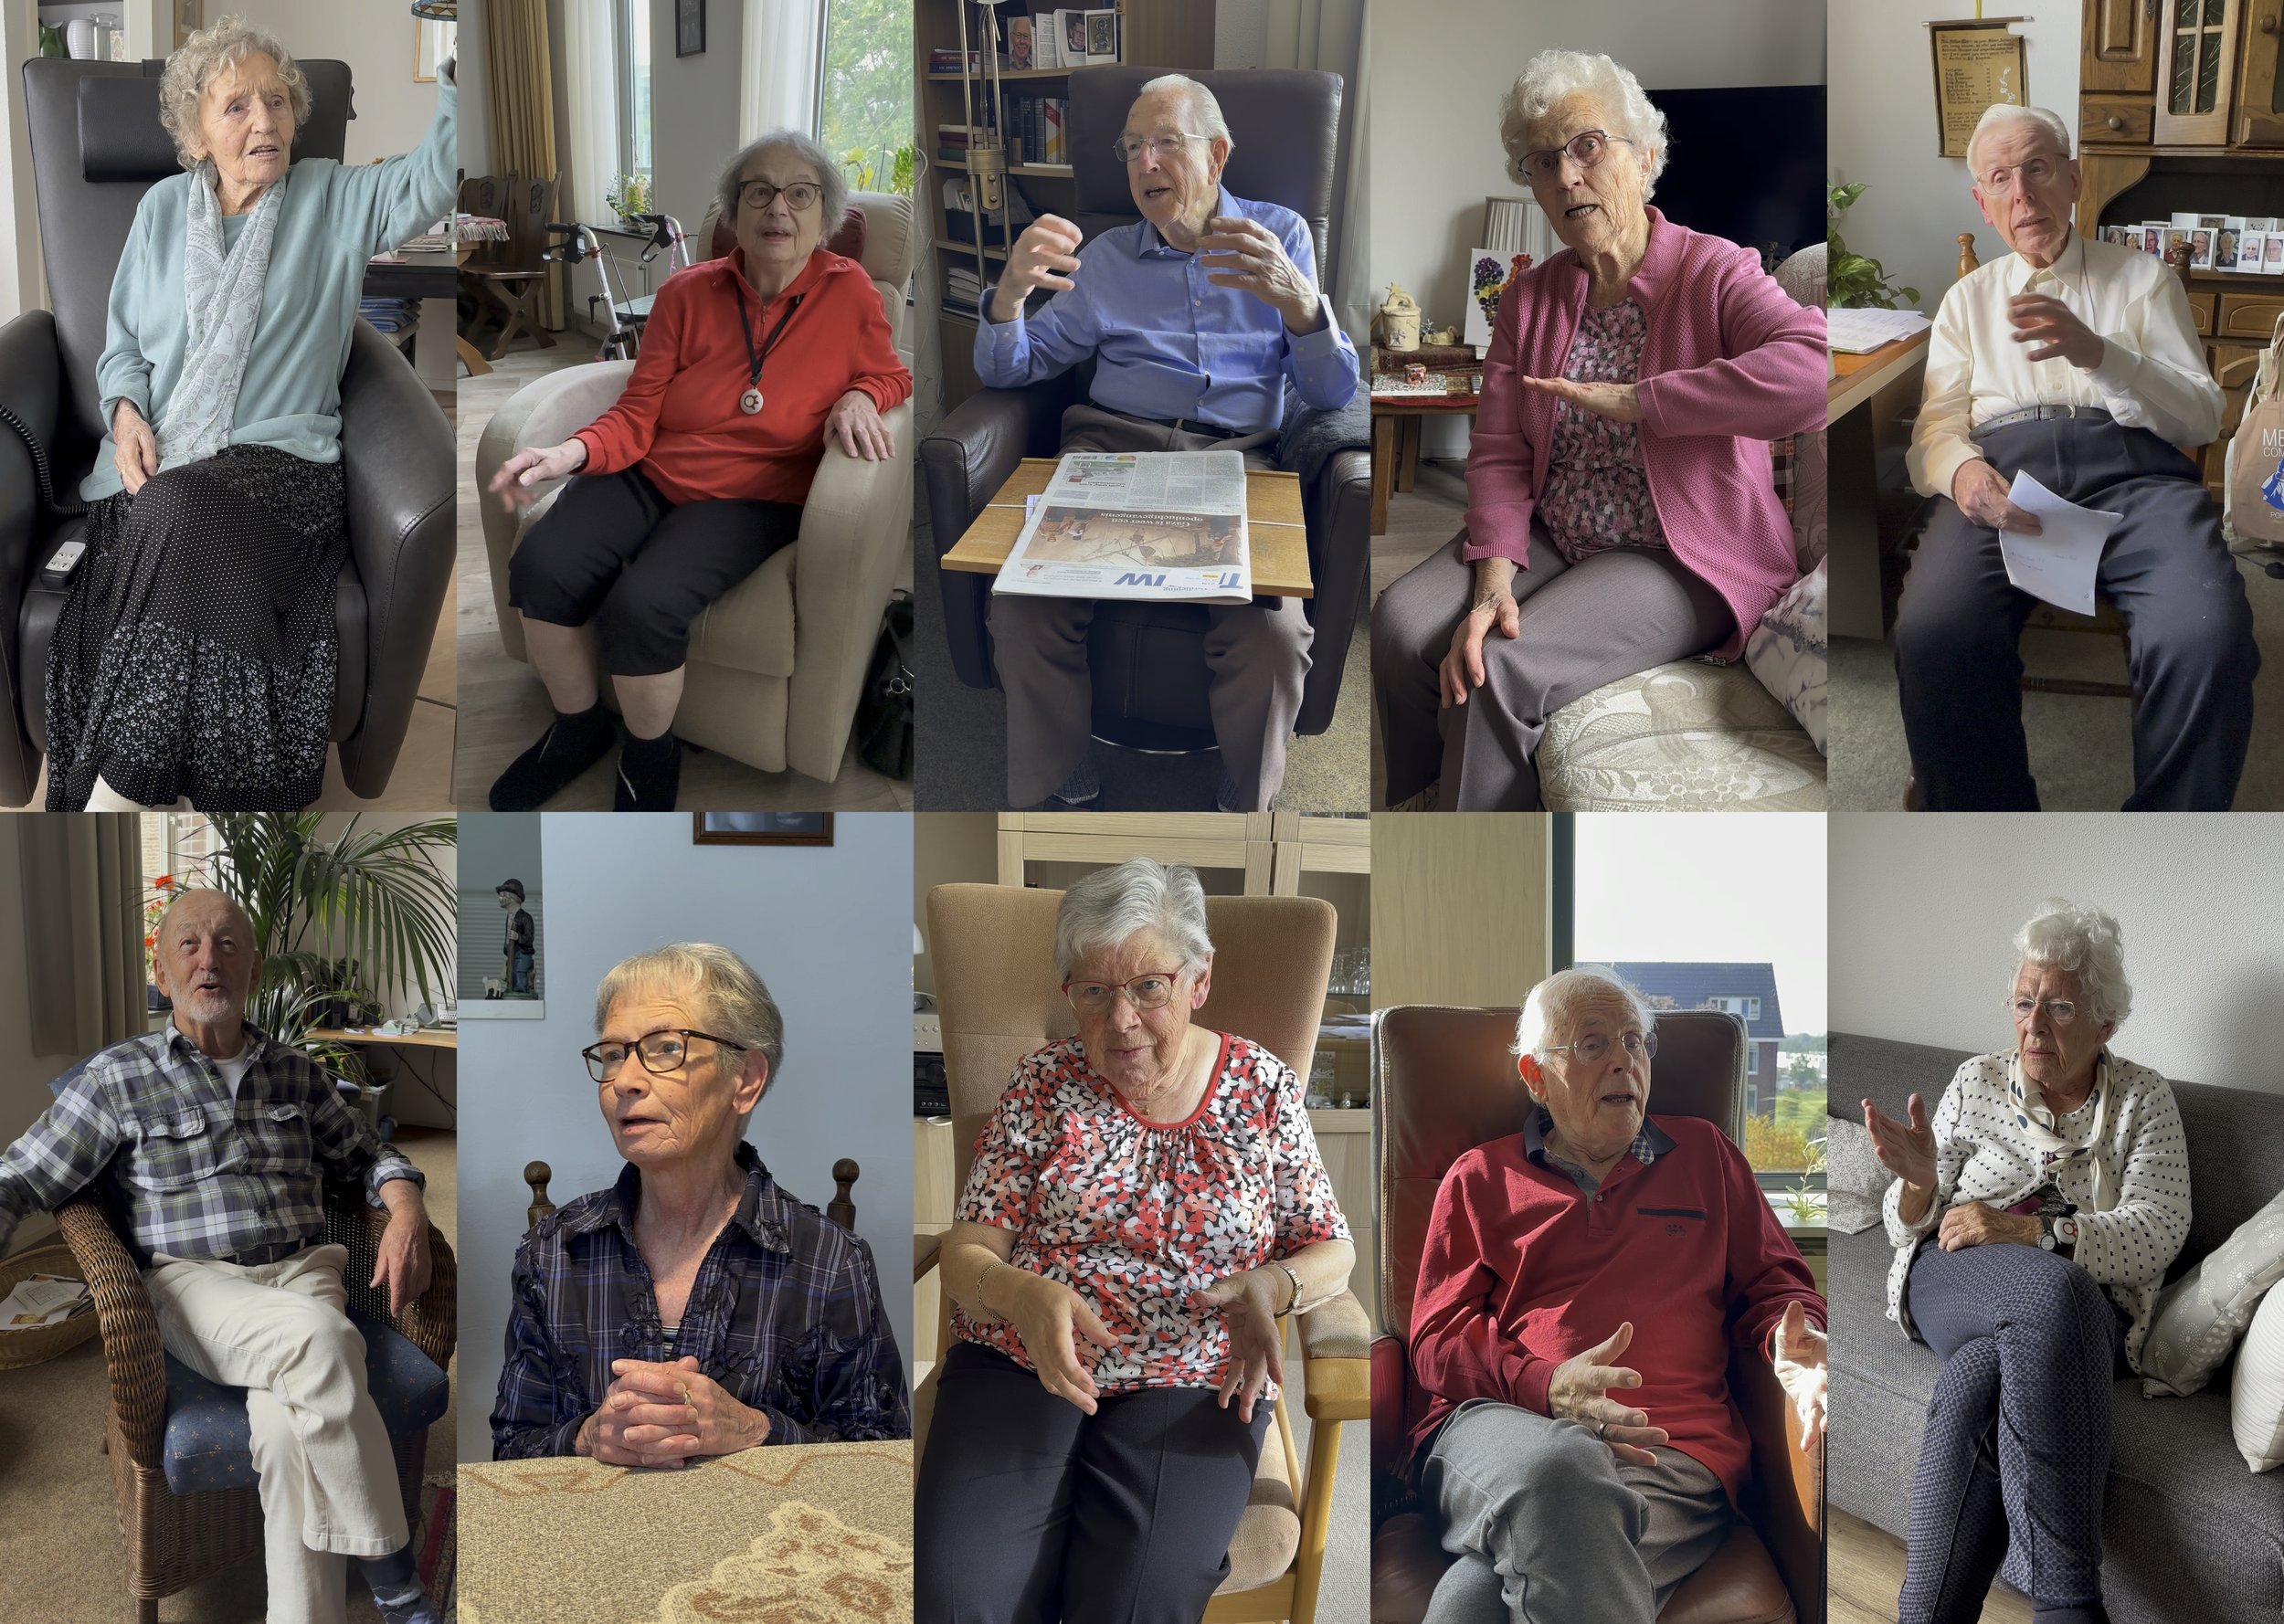  Participants from Park Zuiderhout, stills from videos 